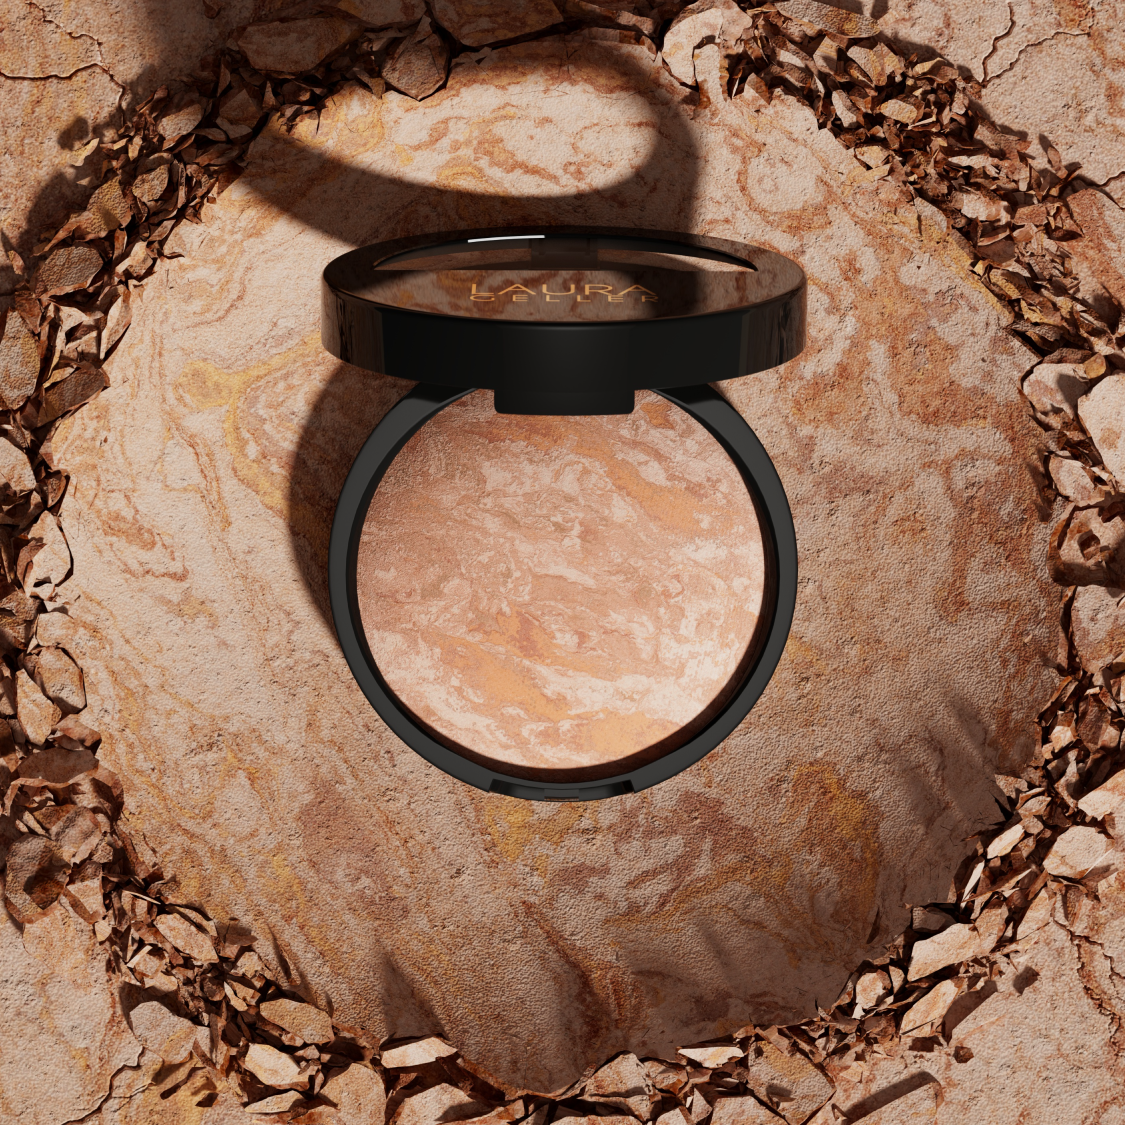 Overhead shot of Baked Balance-n-Brighten Color-Correcting Foundation